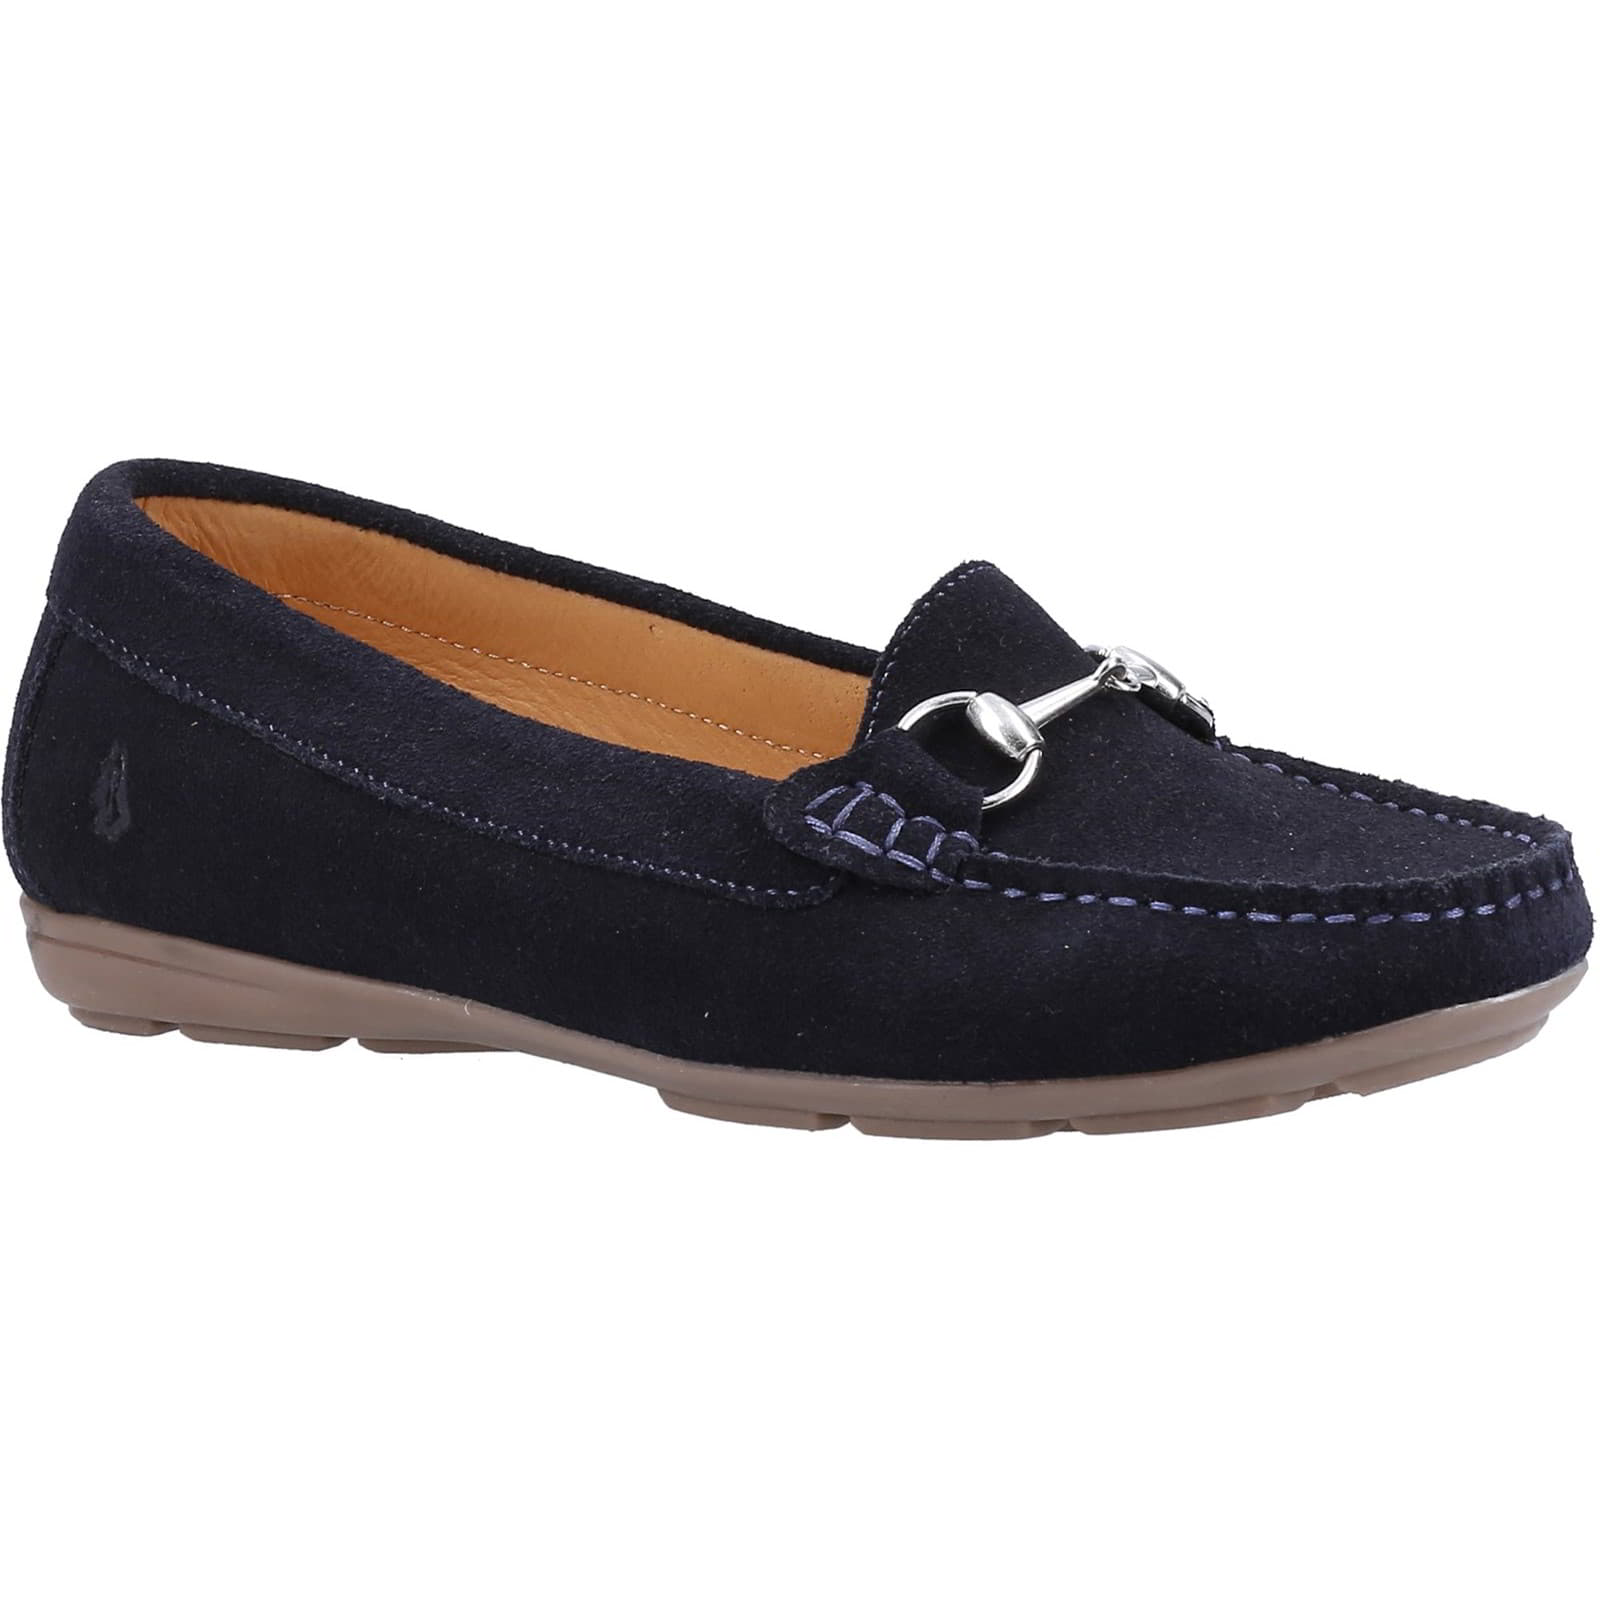 Hush Puppies Women's Molly Leather Slip On Loafers Shoes - UK 8